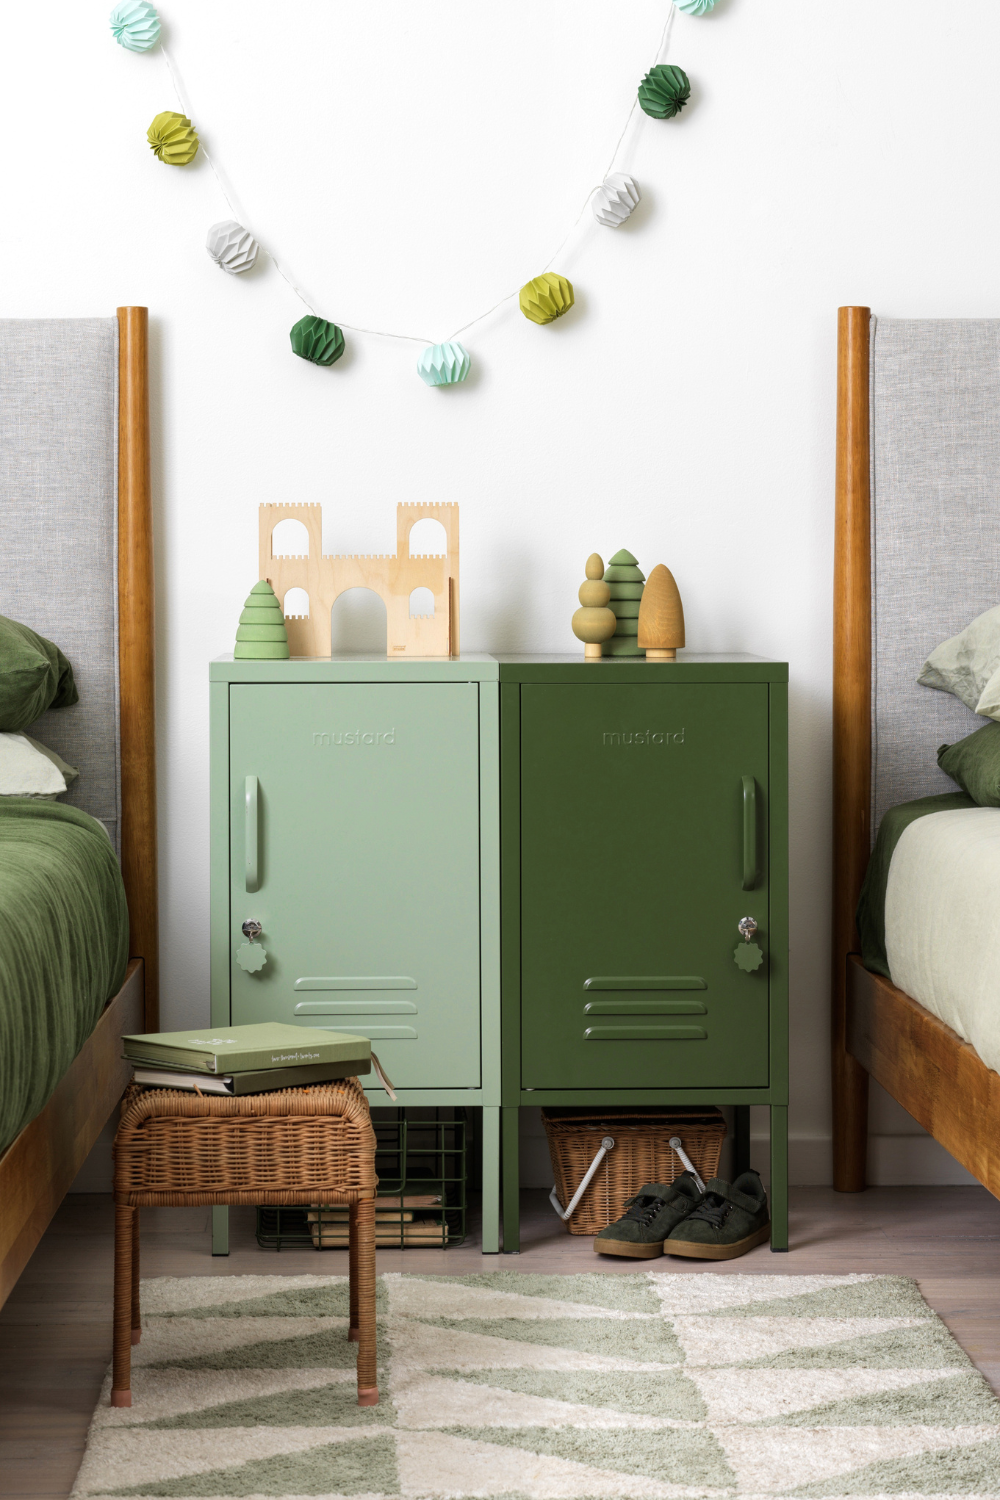 Two Shortys in Sage and Olive sit side by side in a kids bedroom. They are positioned between two beds dressed in green linens and there is a green paper garland hanging on the wall.